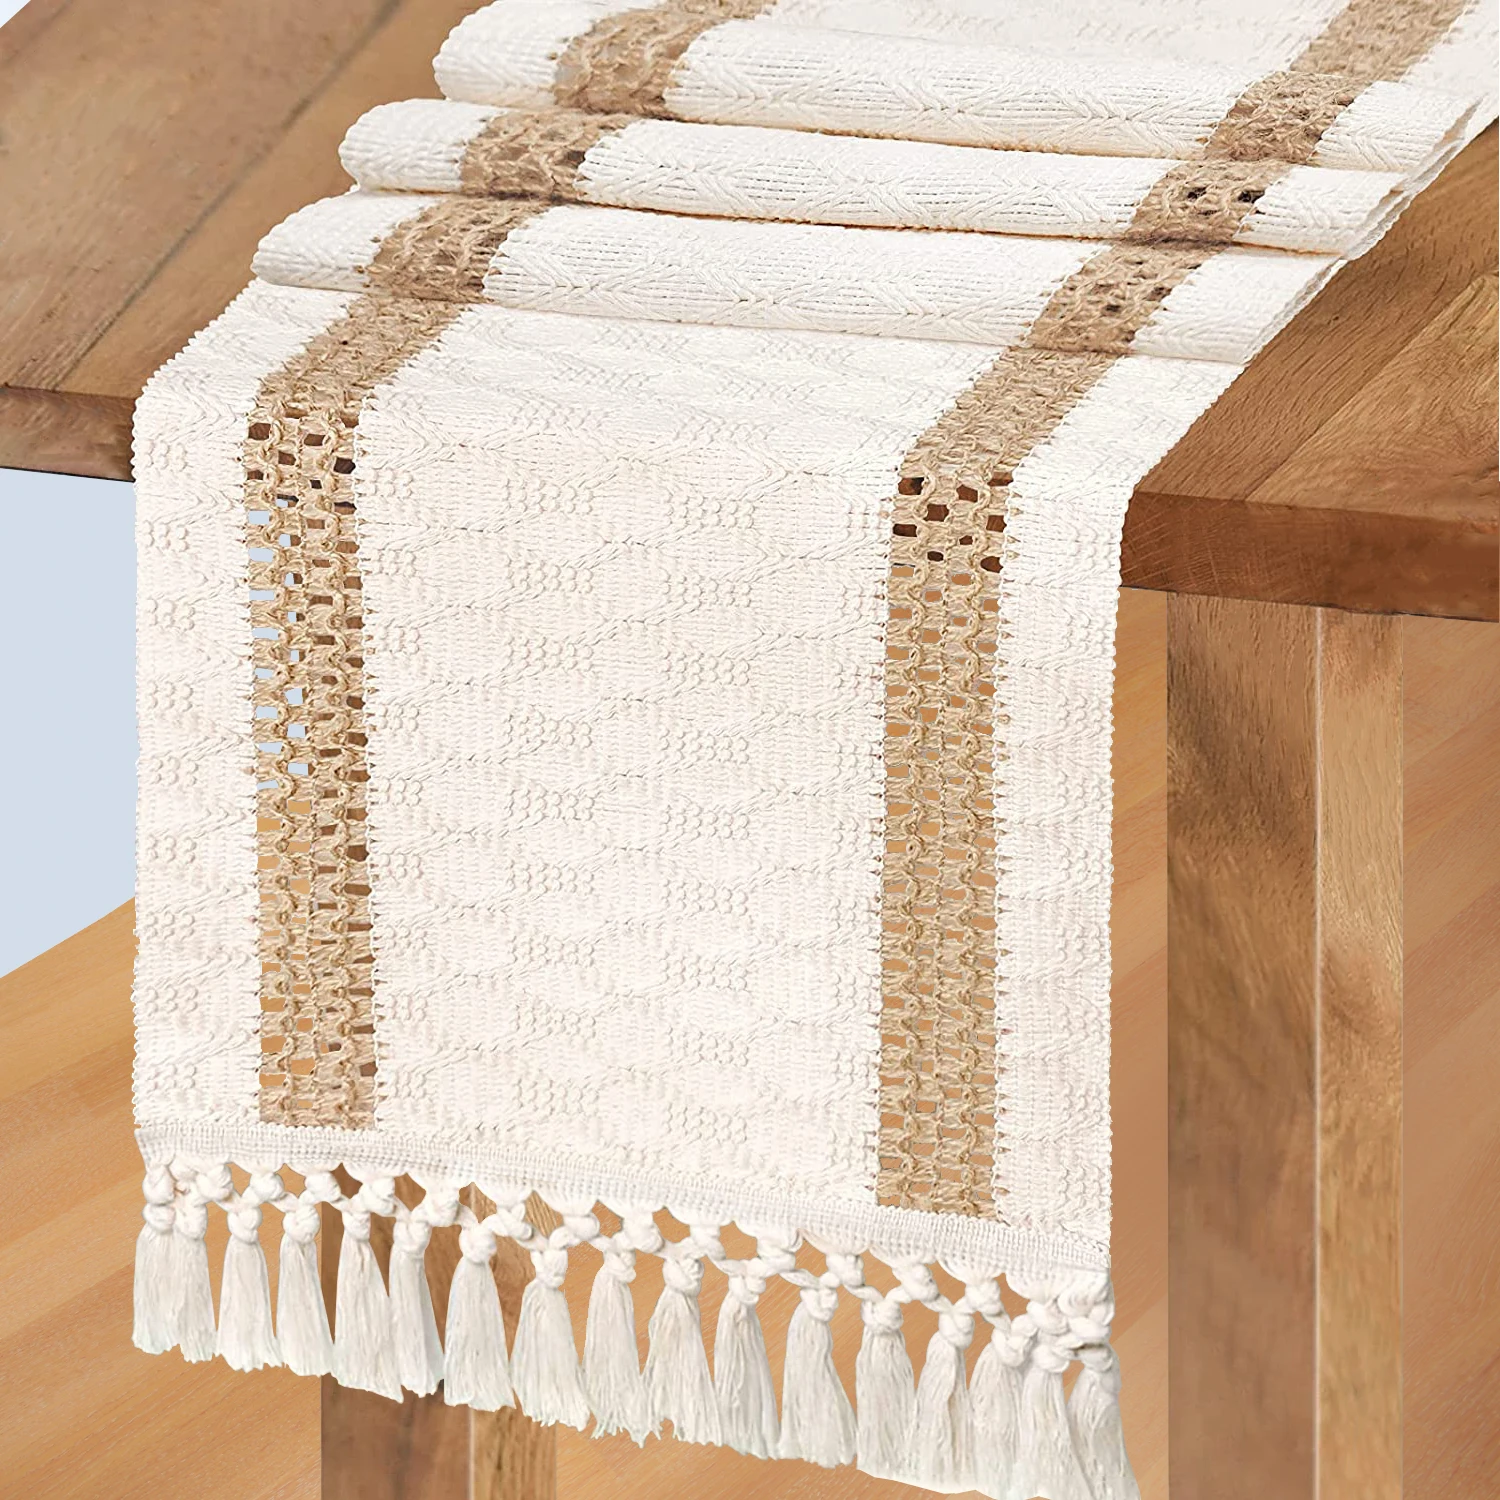 Vlovelife Macrame Table Runners Natural Burlap Splicing Cotton Boho Table Runner with Tassels Bohemian Rustic Home Wedding